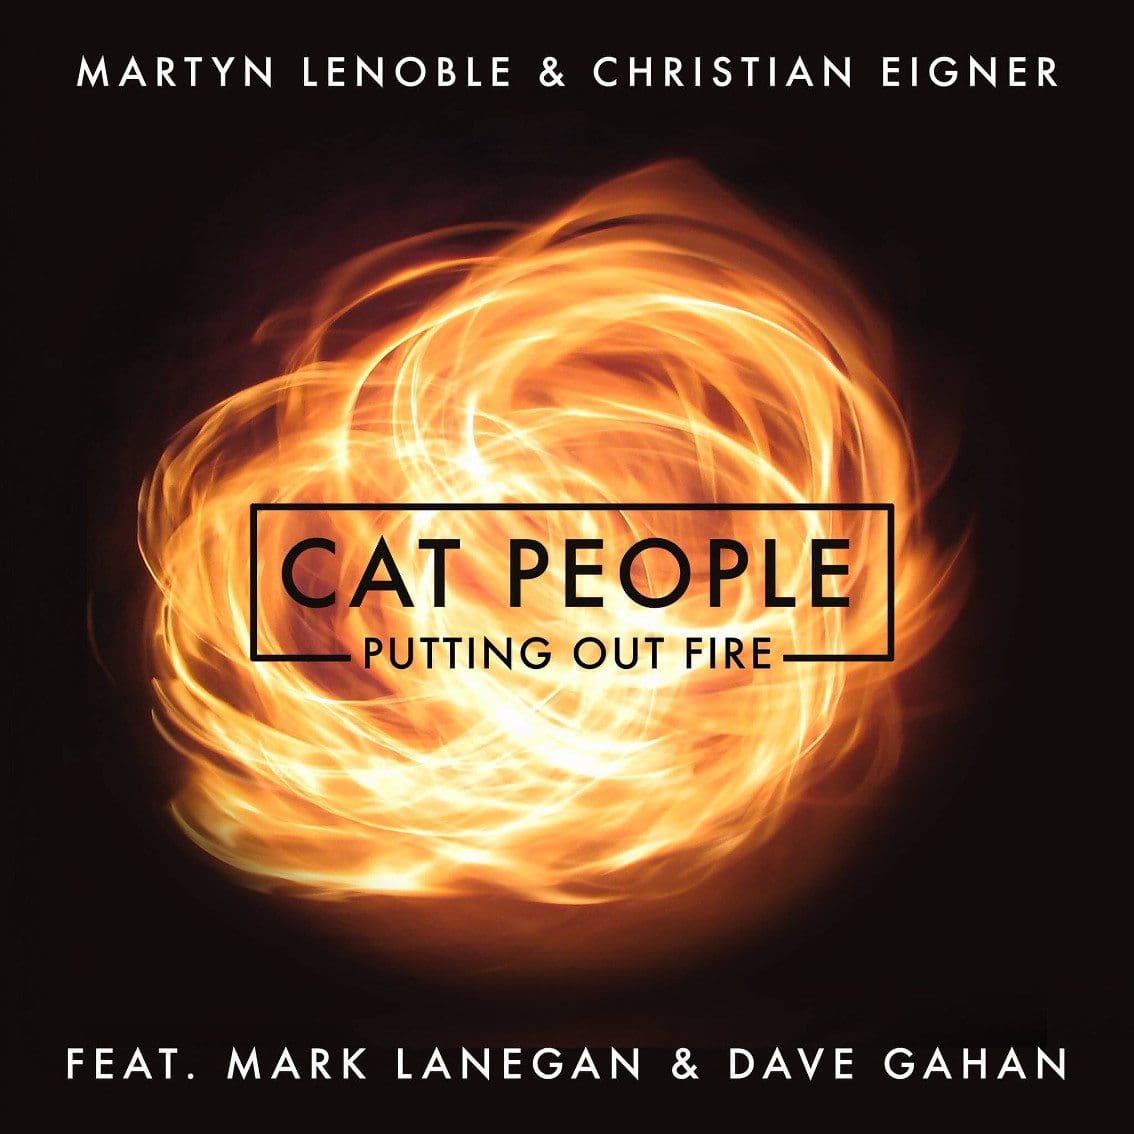 David Gahan (Depeche Mode) records David Bowie cover for charity together with Mark Lanegan (The Screaming Trees), Martyn LeNoble and Christian Eigner